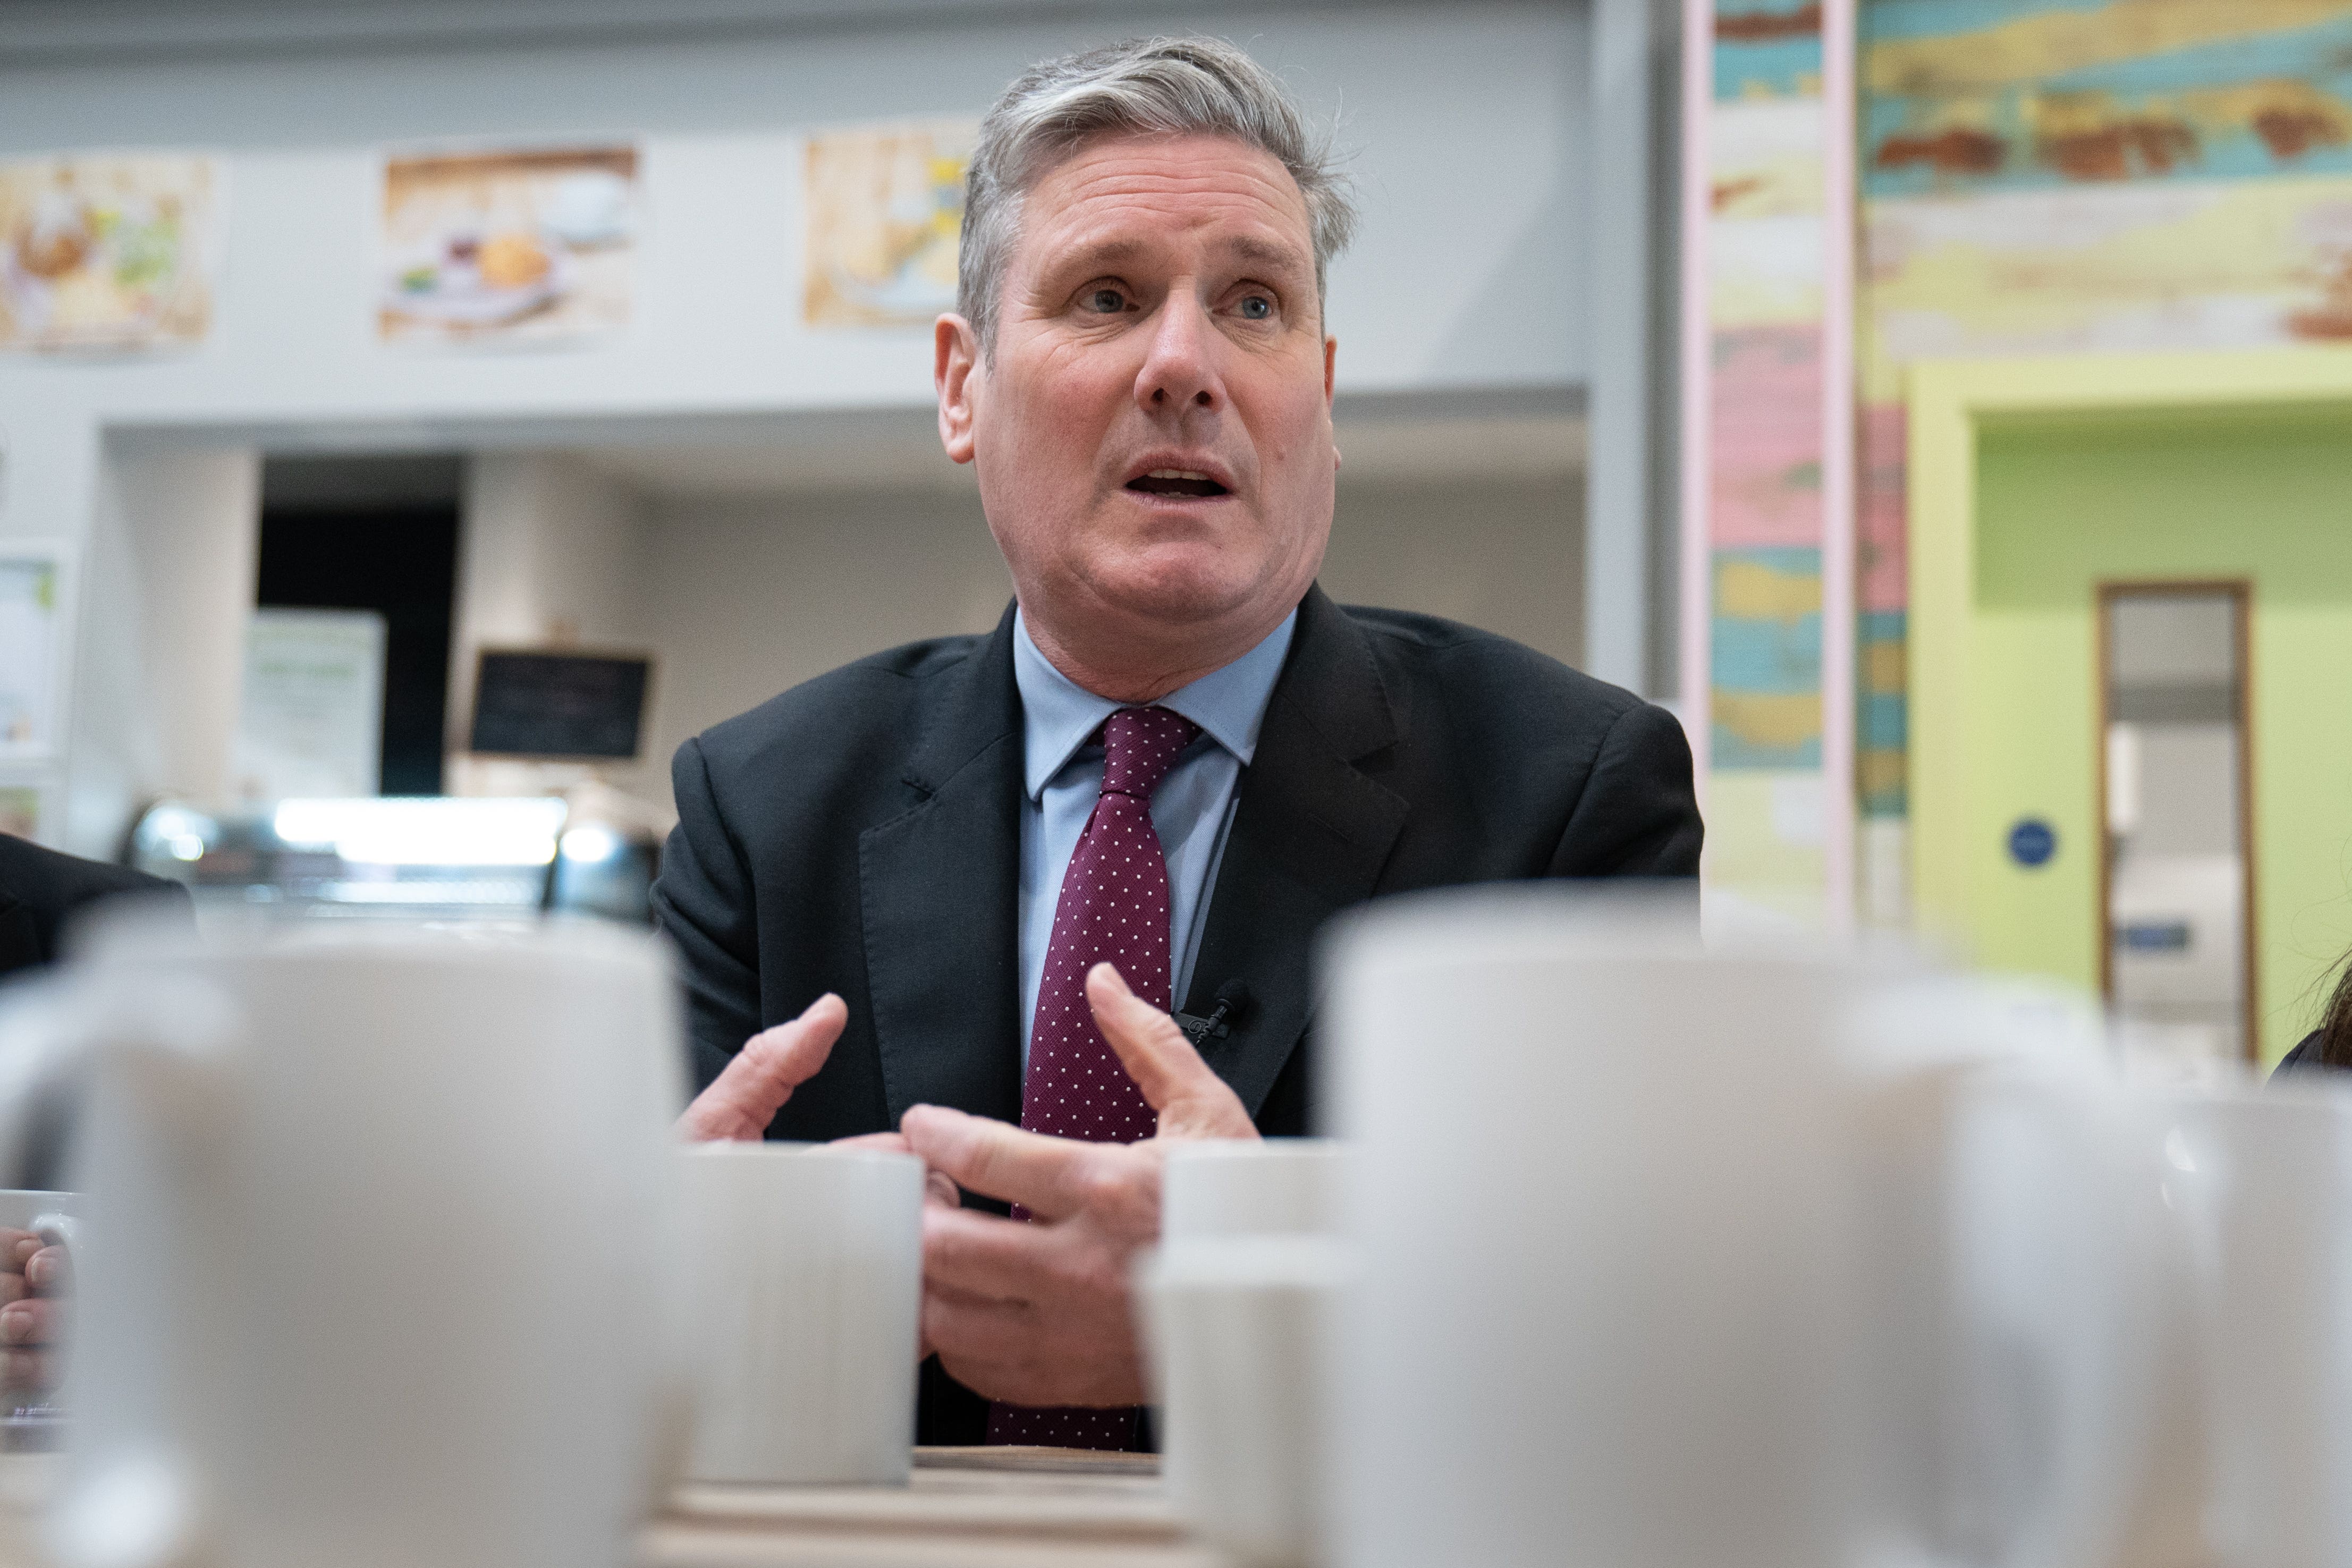 Labour leader Sir Keir Starmer says he stands by every word